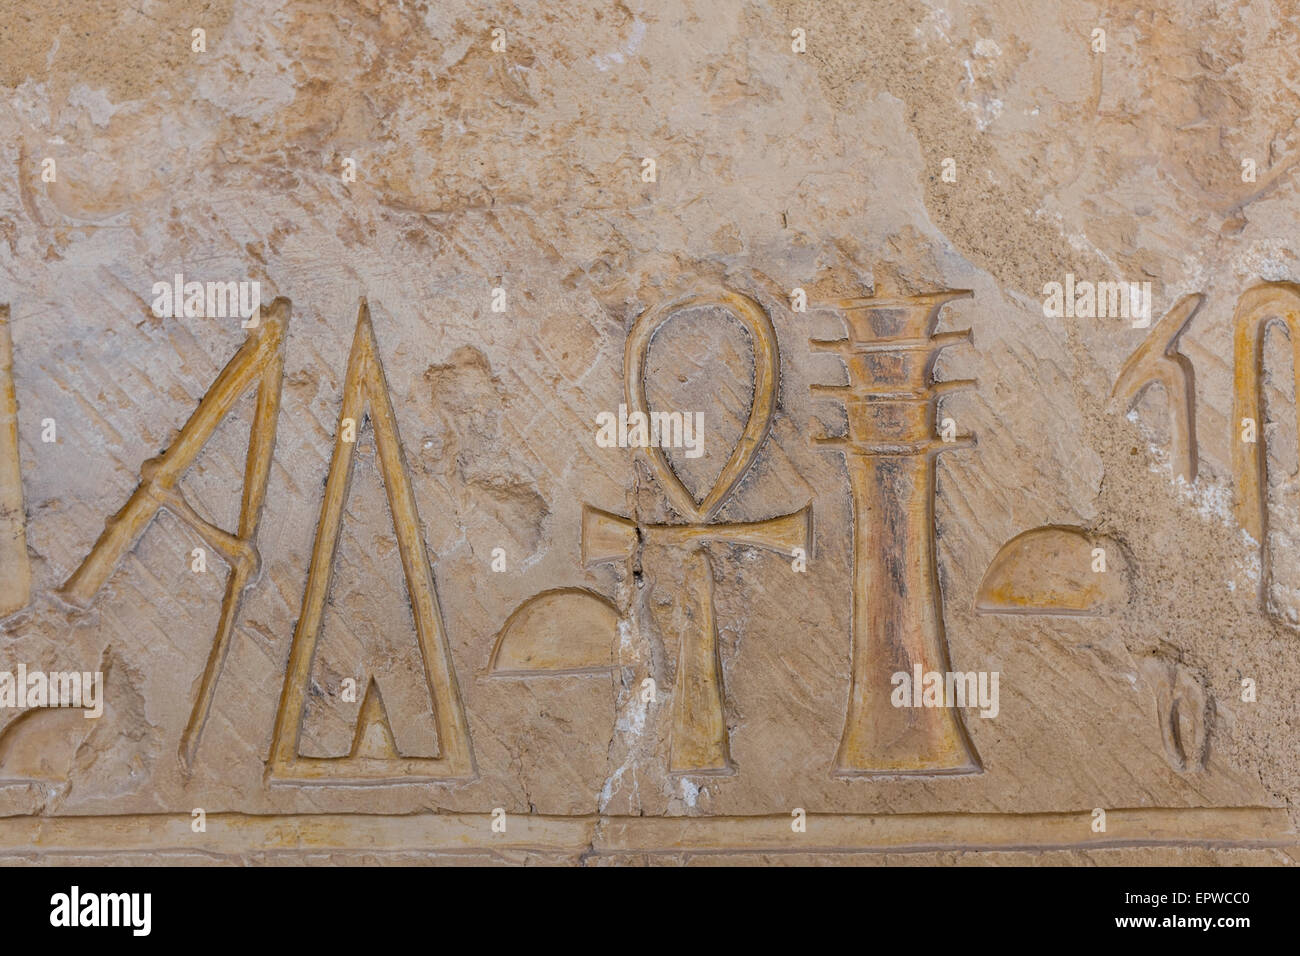 Heiroglyphics depicting the Ankh and Djed pillar, Queen Hatshepsut's temple, Deir el-Bahri, West bank of the Nile, Luxor, Egypt Stock Photo